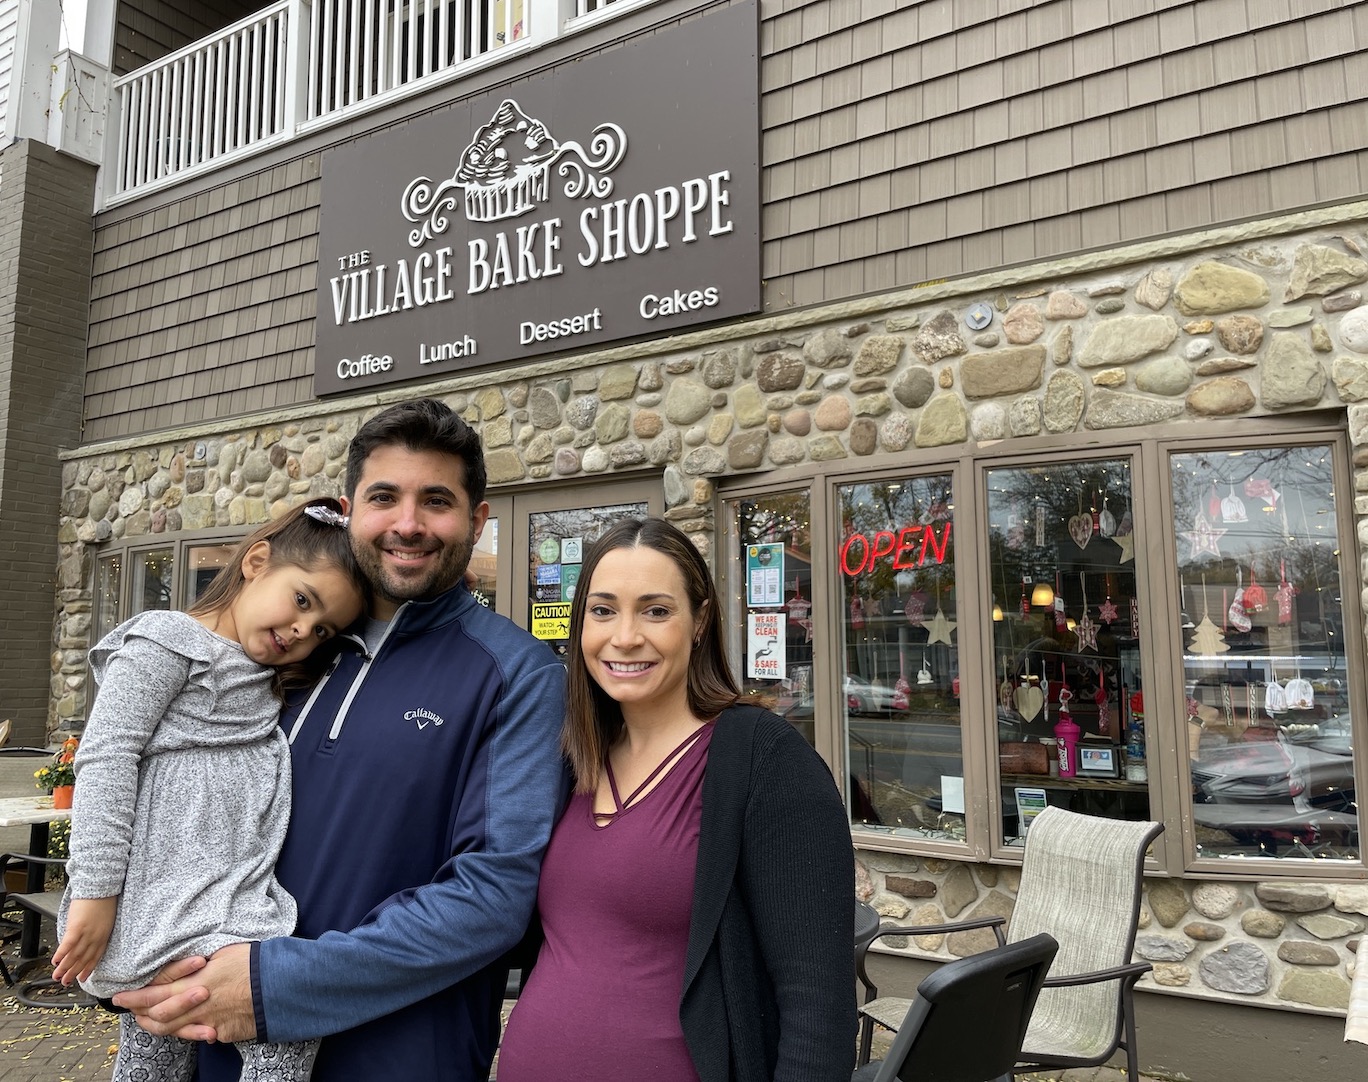 Mike, Lindsay (with baby No. 2) and Jeana Fiore celebrate their first decade at The Village Bake Shoppe in Lewiston.